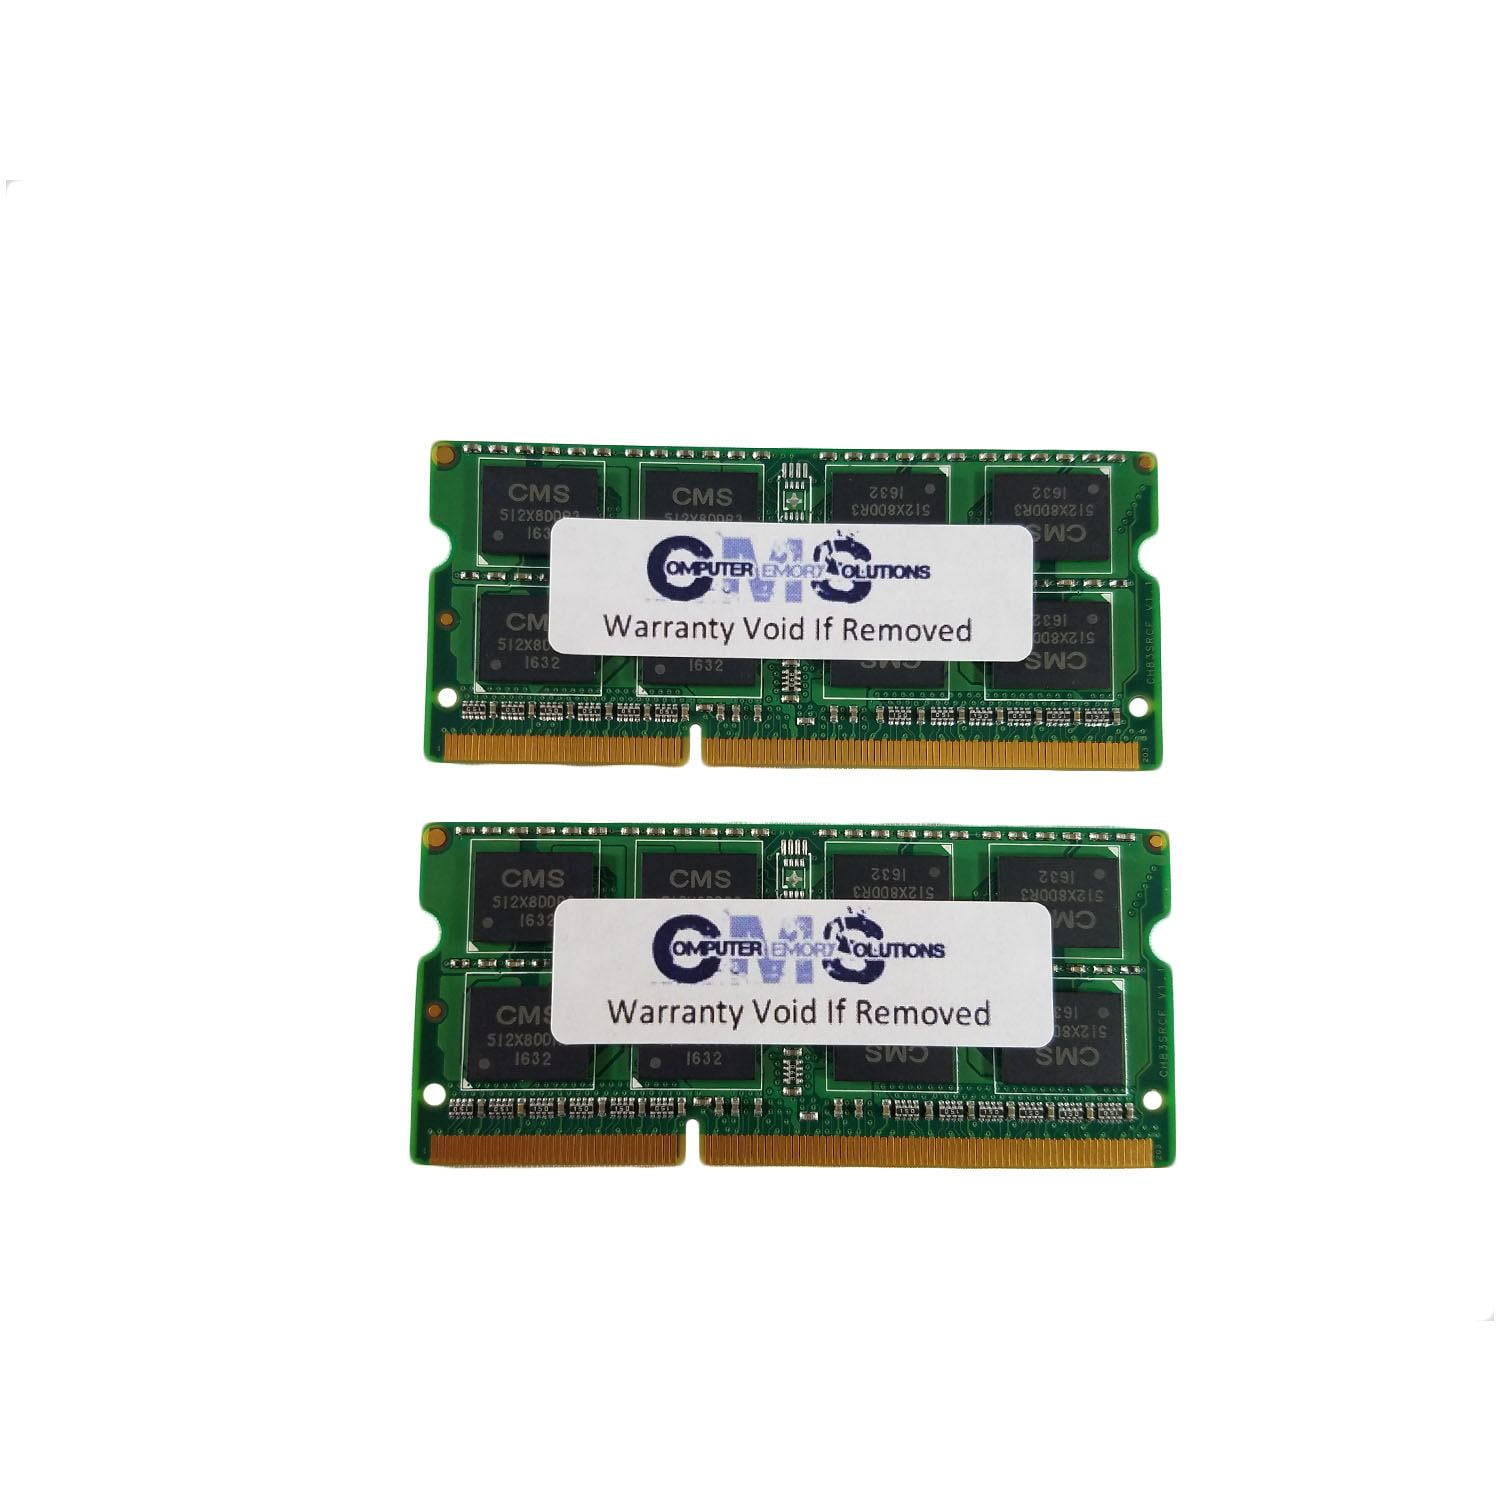 A35 CMS 8GB 2X4GB Memory Ram Compatible with MacBook Pro 13 Aluminum Mid-2009 and 2010 